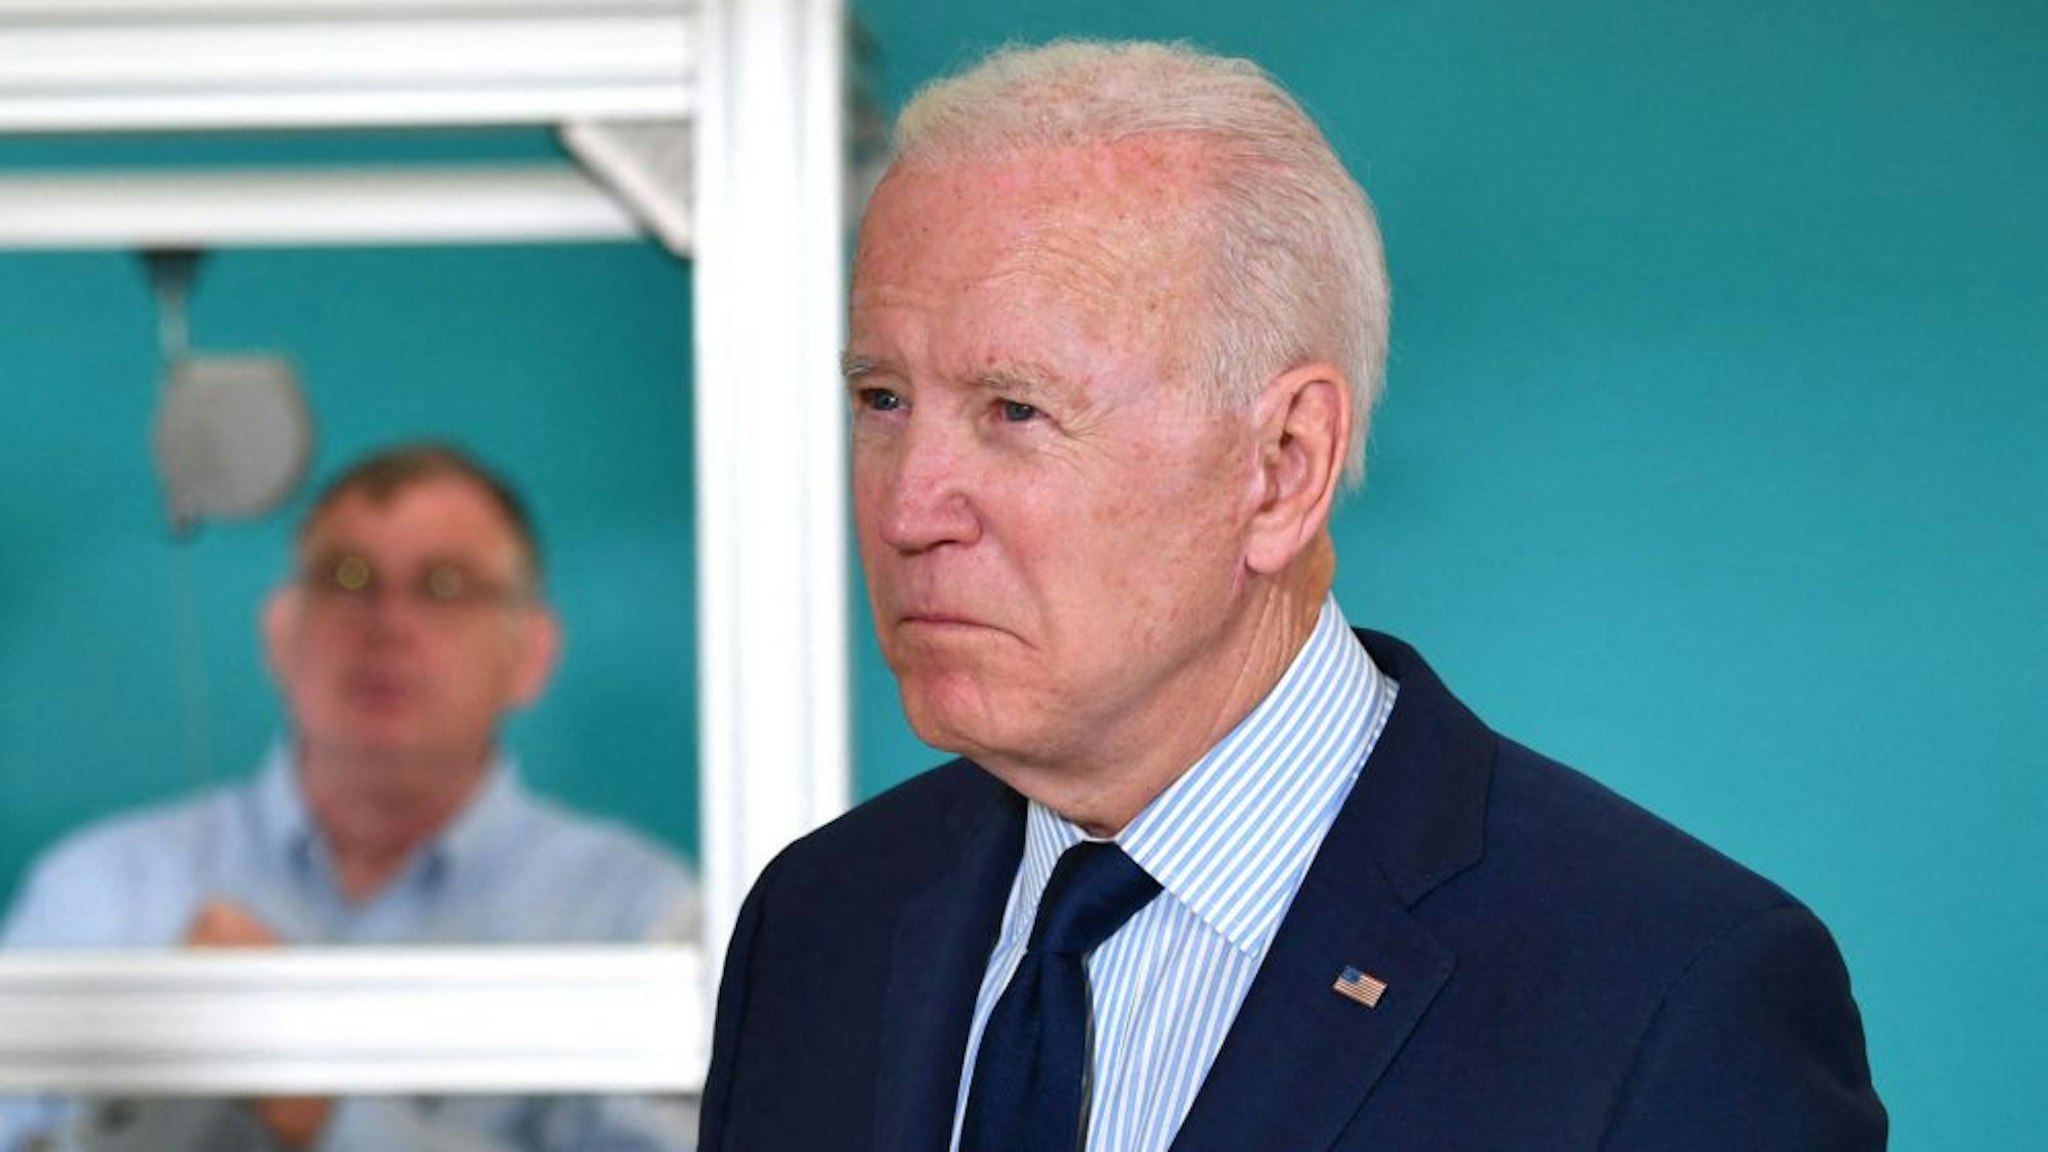 US President Joe Biden looks on during a tour of the Cuyahoga Community College Manufacturing Technology Center, on May 27, 2021, in Cleveland, Ohio.